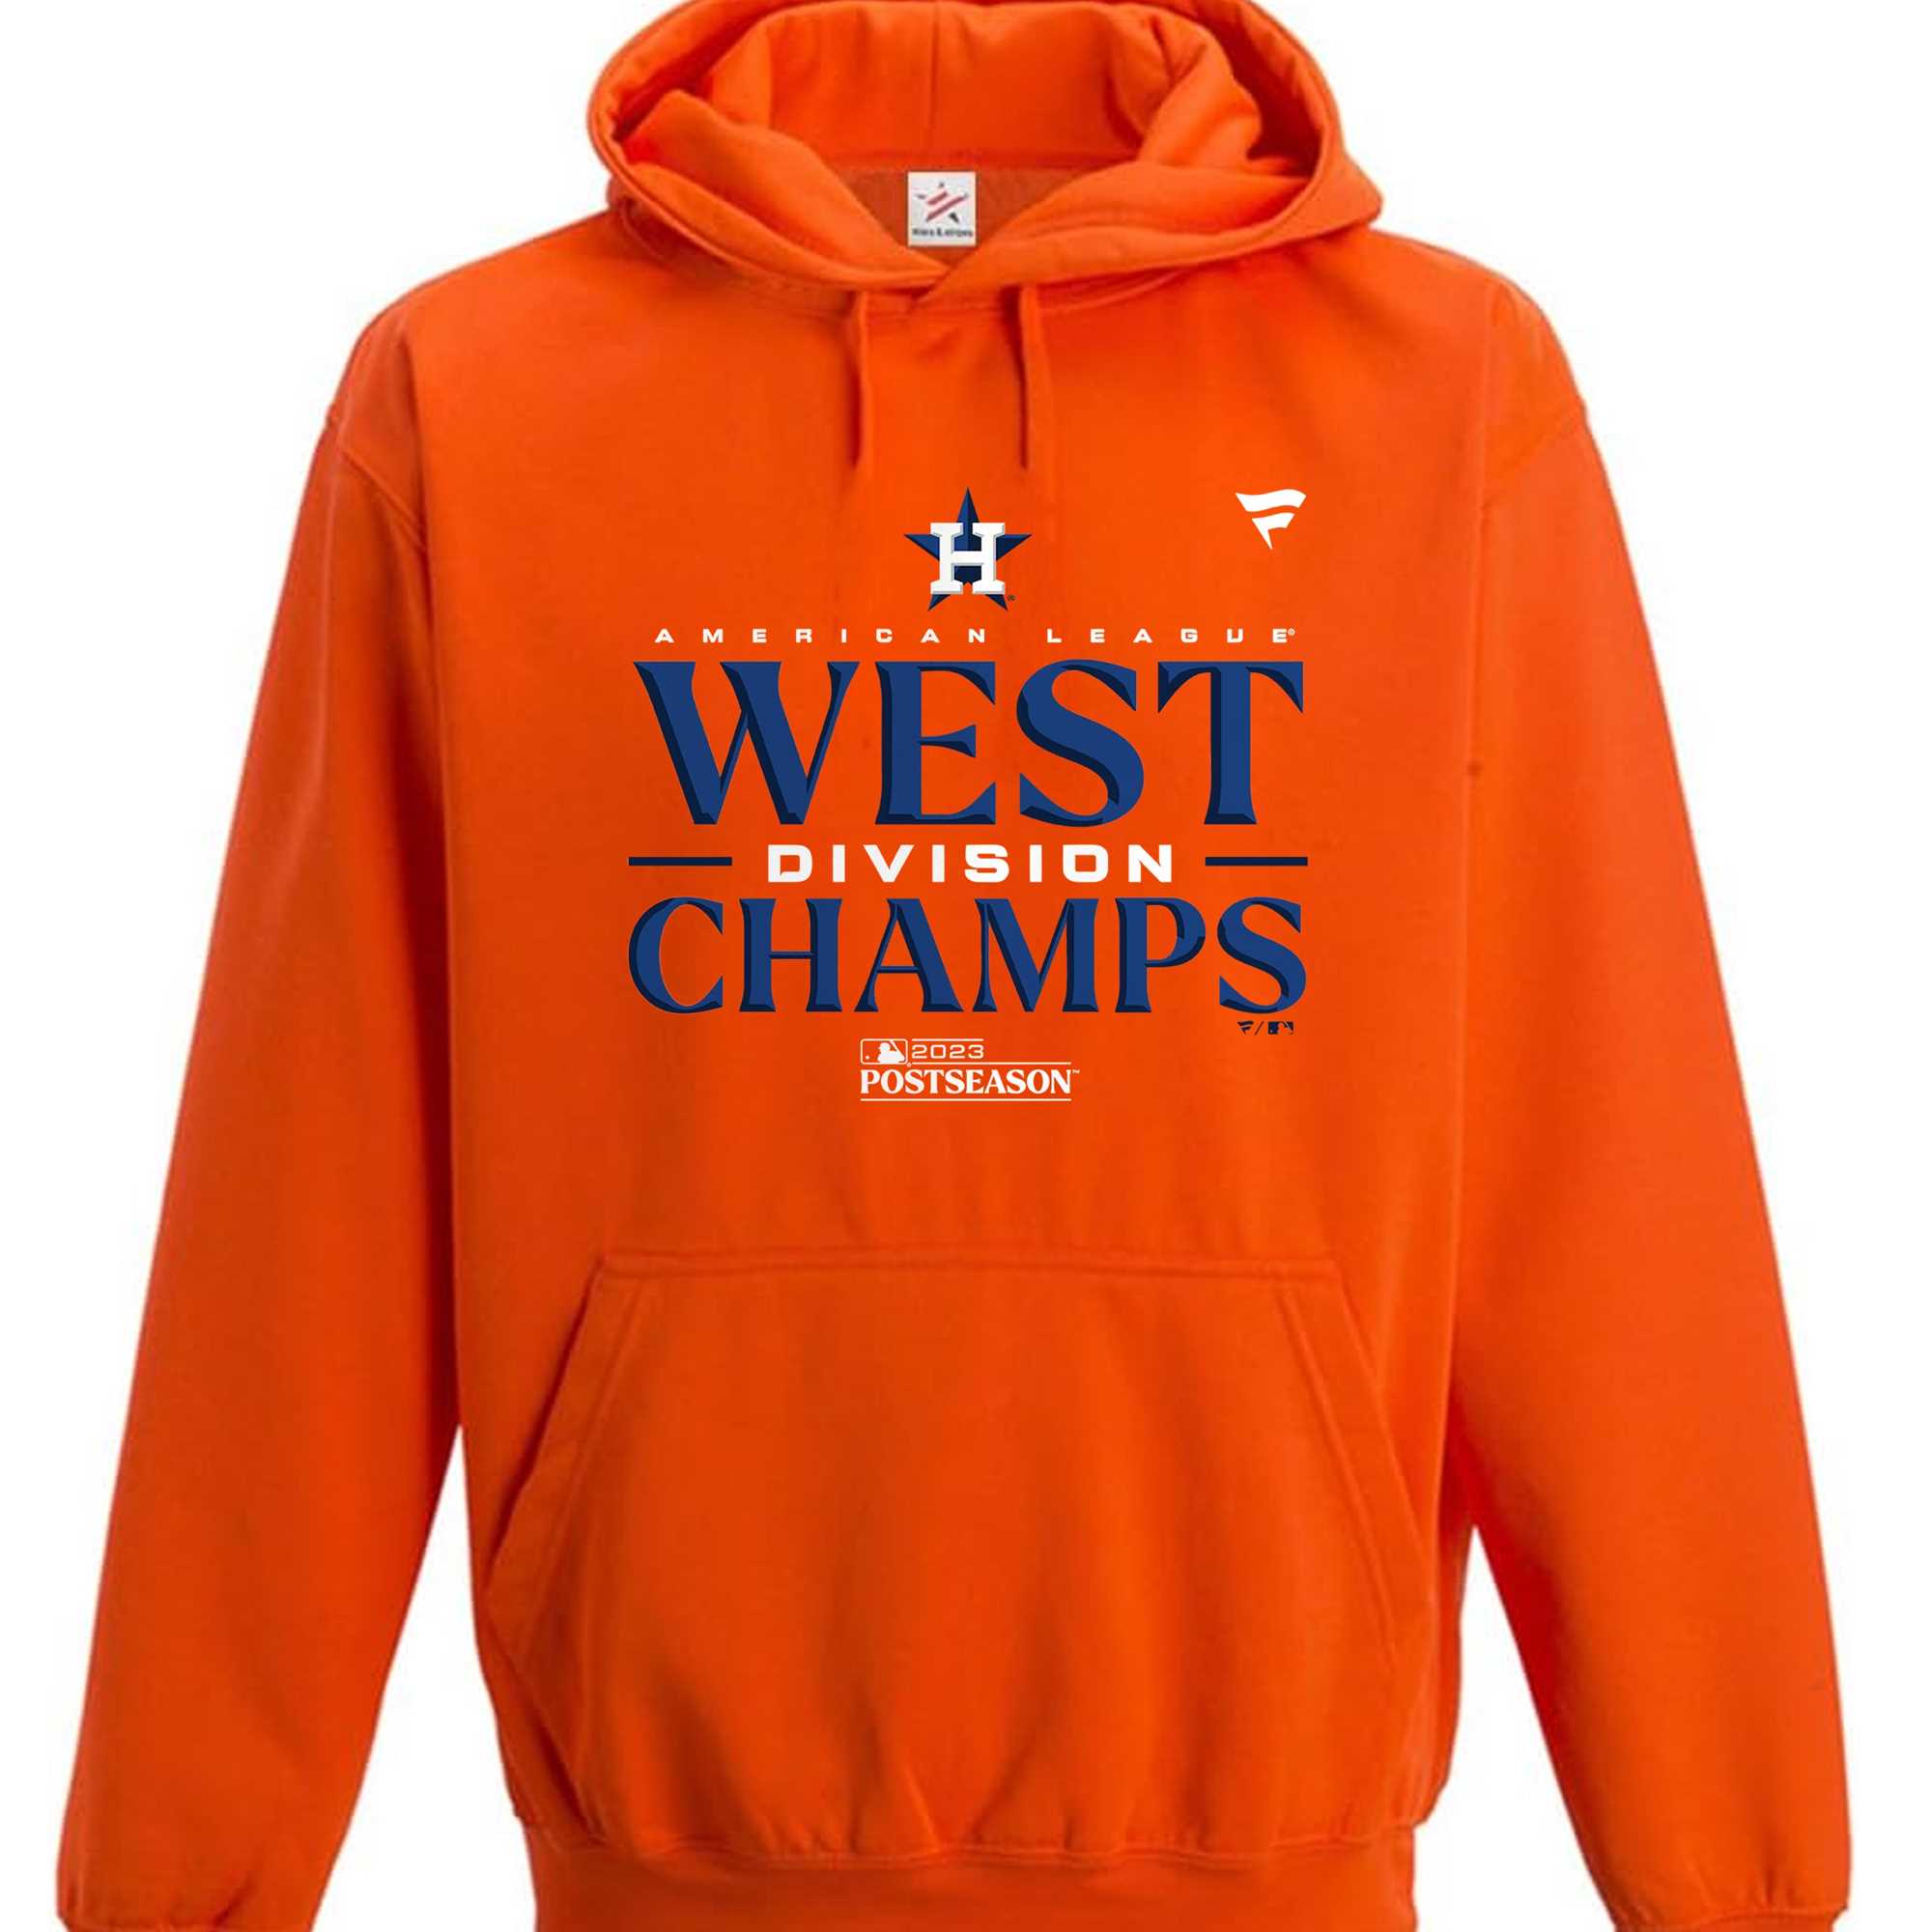 Official houston Astros AL West Division Champs 2023 Shirt, hoodie,  sweatshirt for men and women